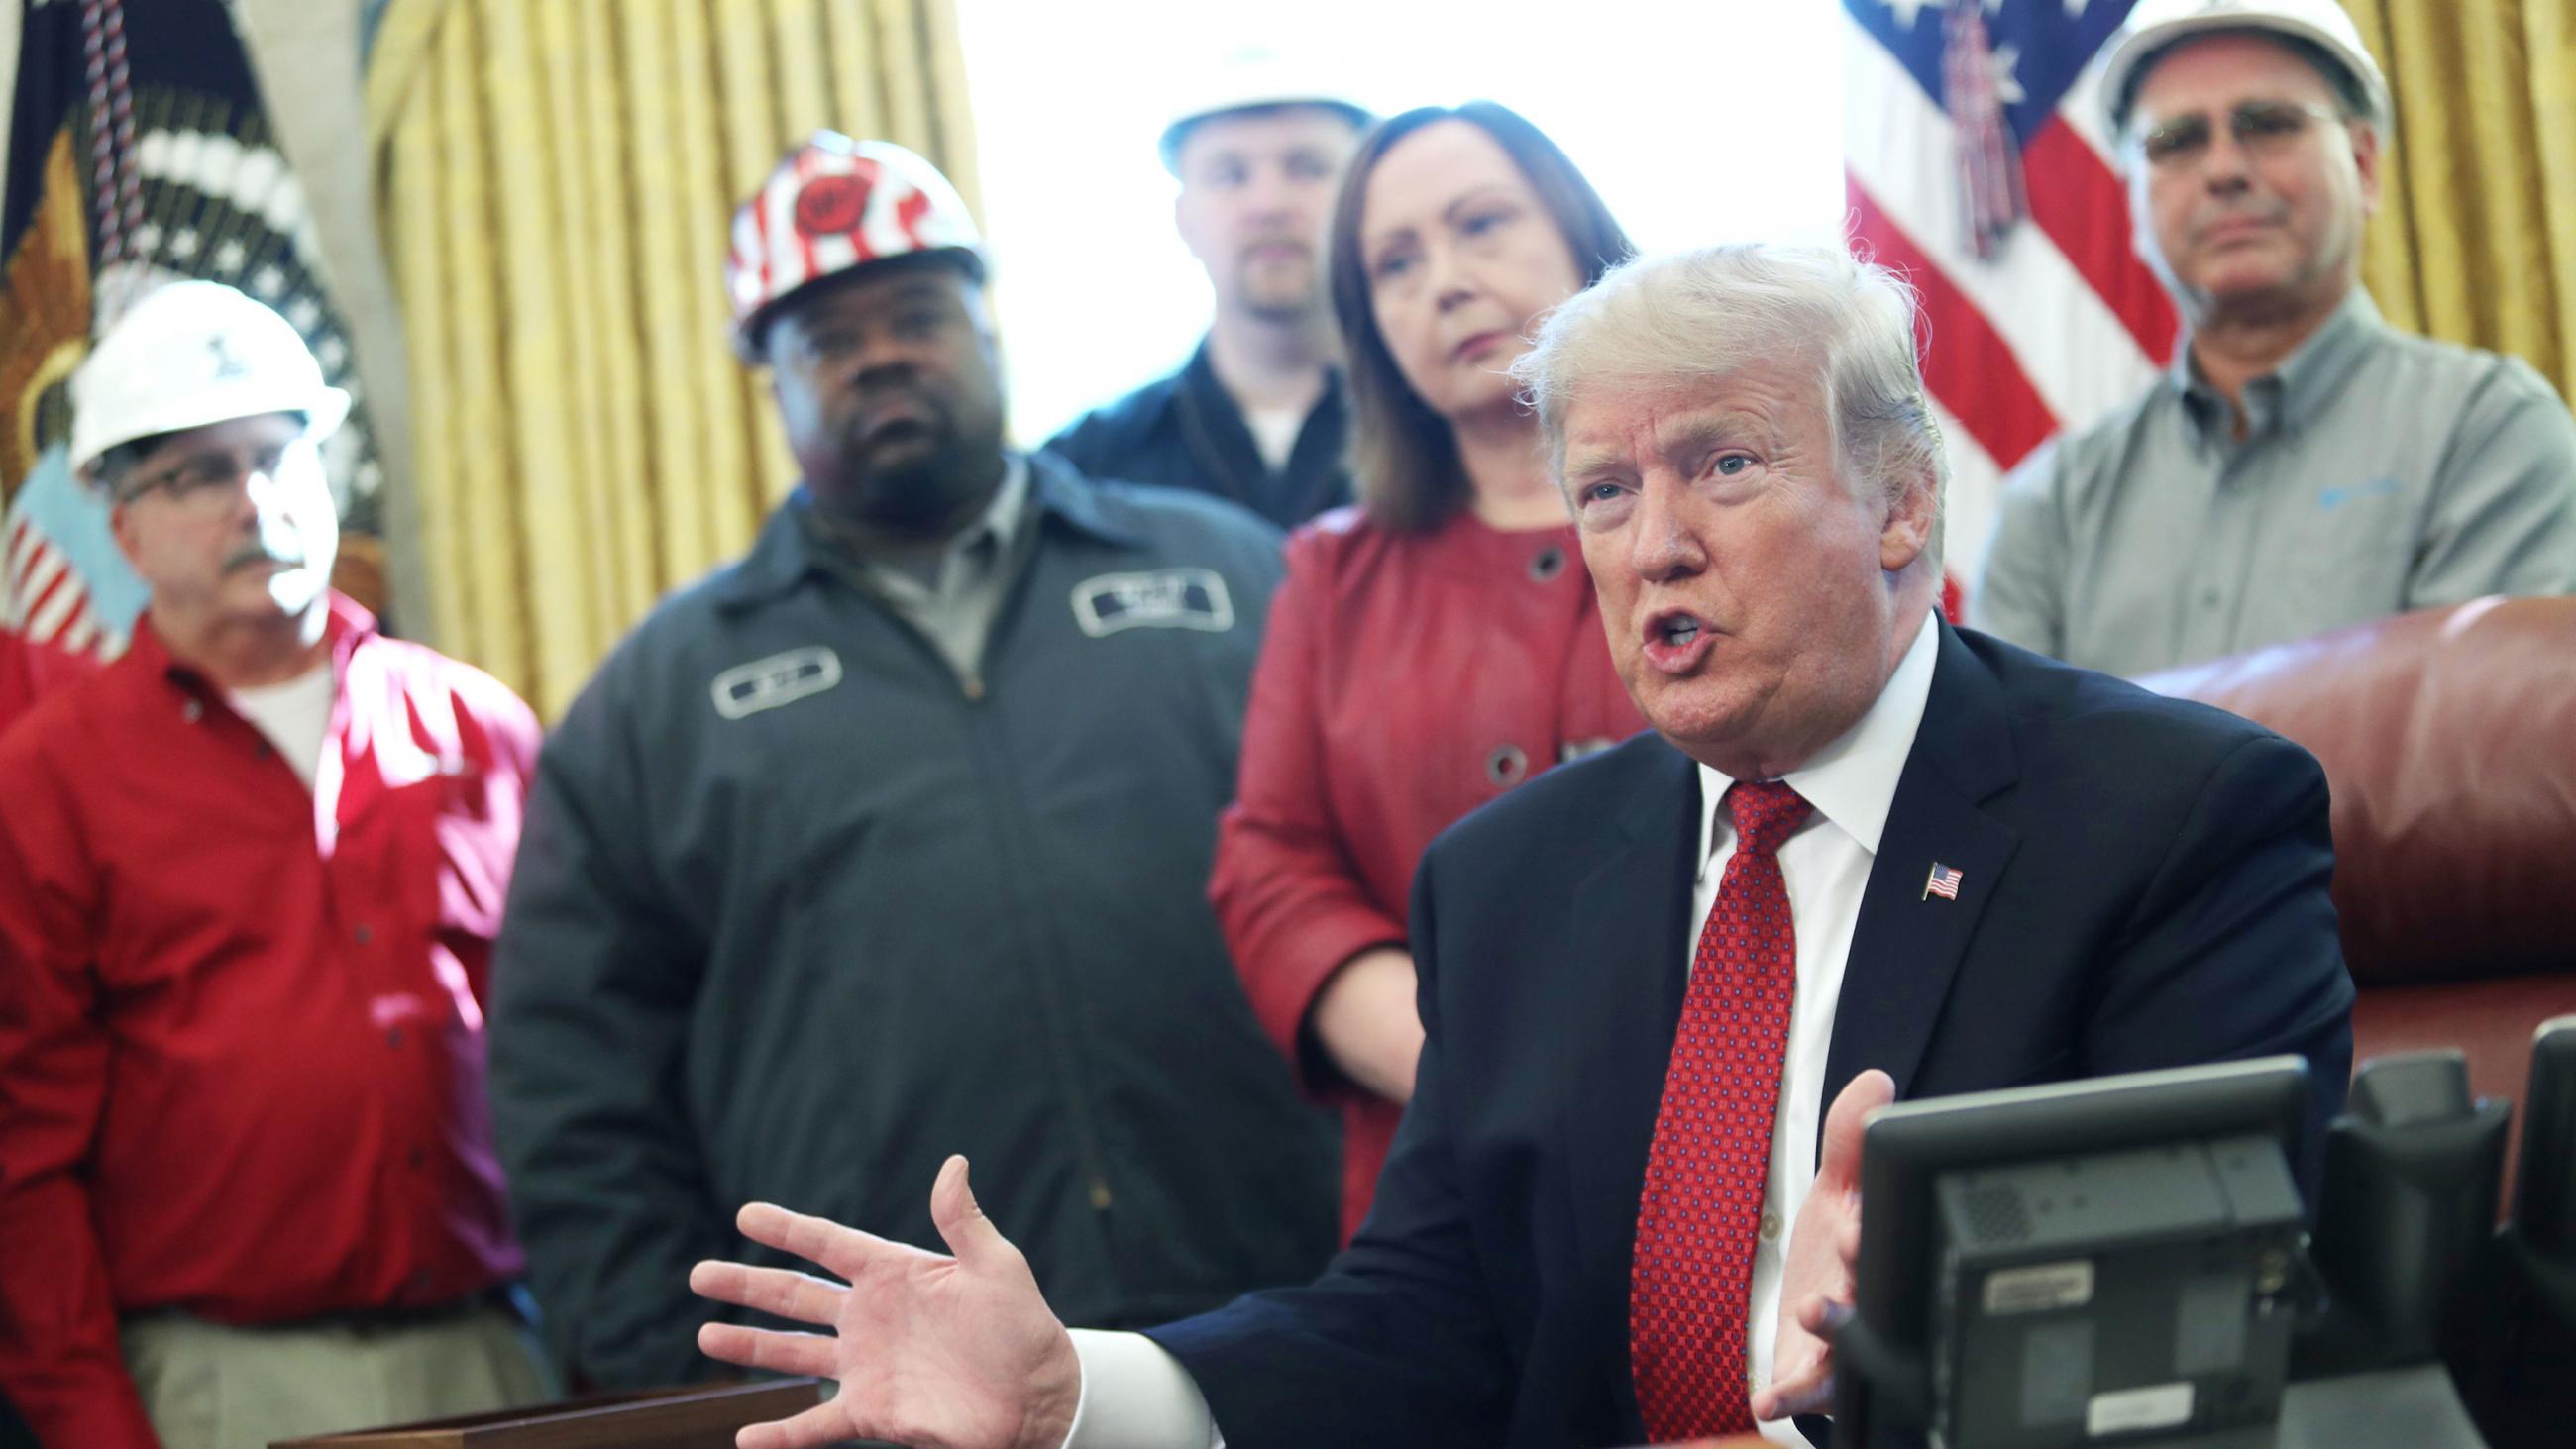 The photo shows the U.S. president at his desk talking and gesturing with his hands as he is surrounded by what appear to be factory workers, wearing brightly colored shirts. Some of them have hard hats. 